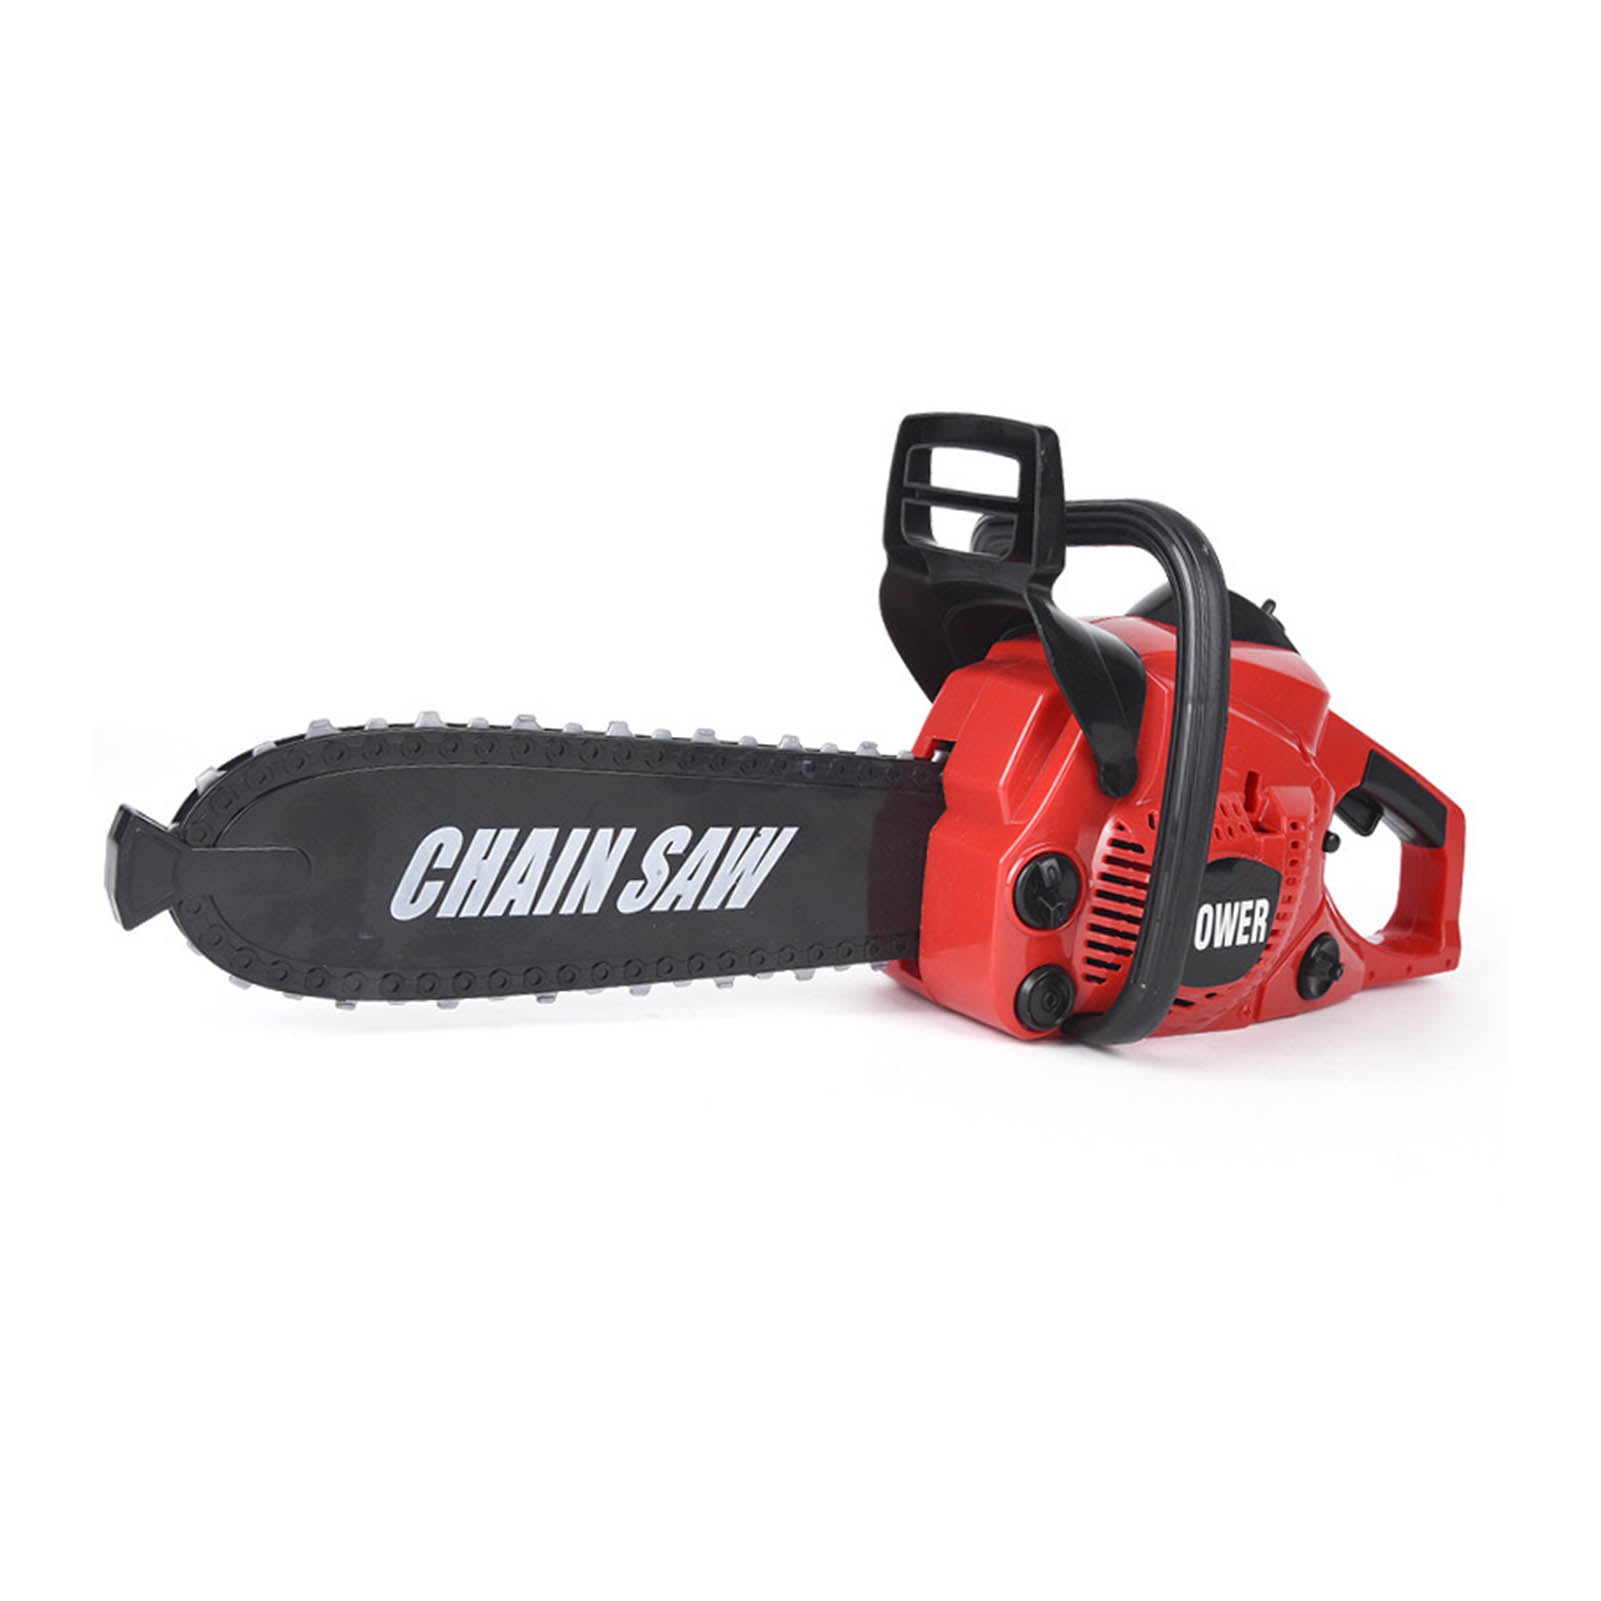 Simulation City Construction Chainsaw Tool w/ Realistic Sounds for Children Toys 